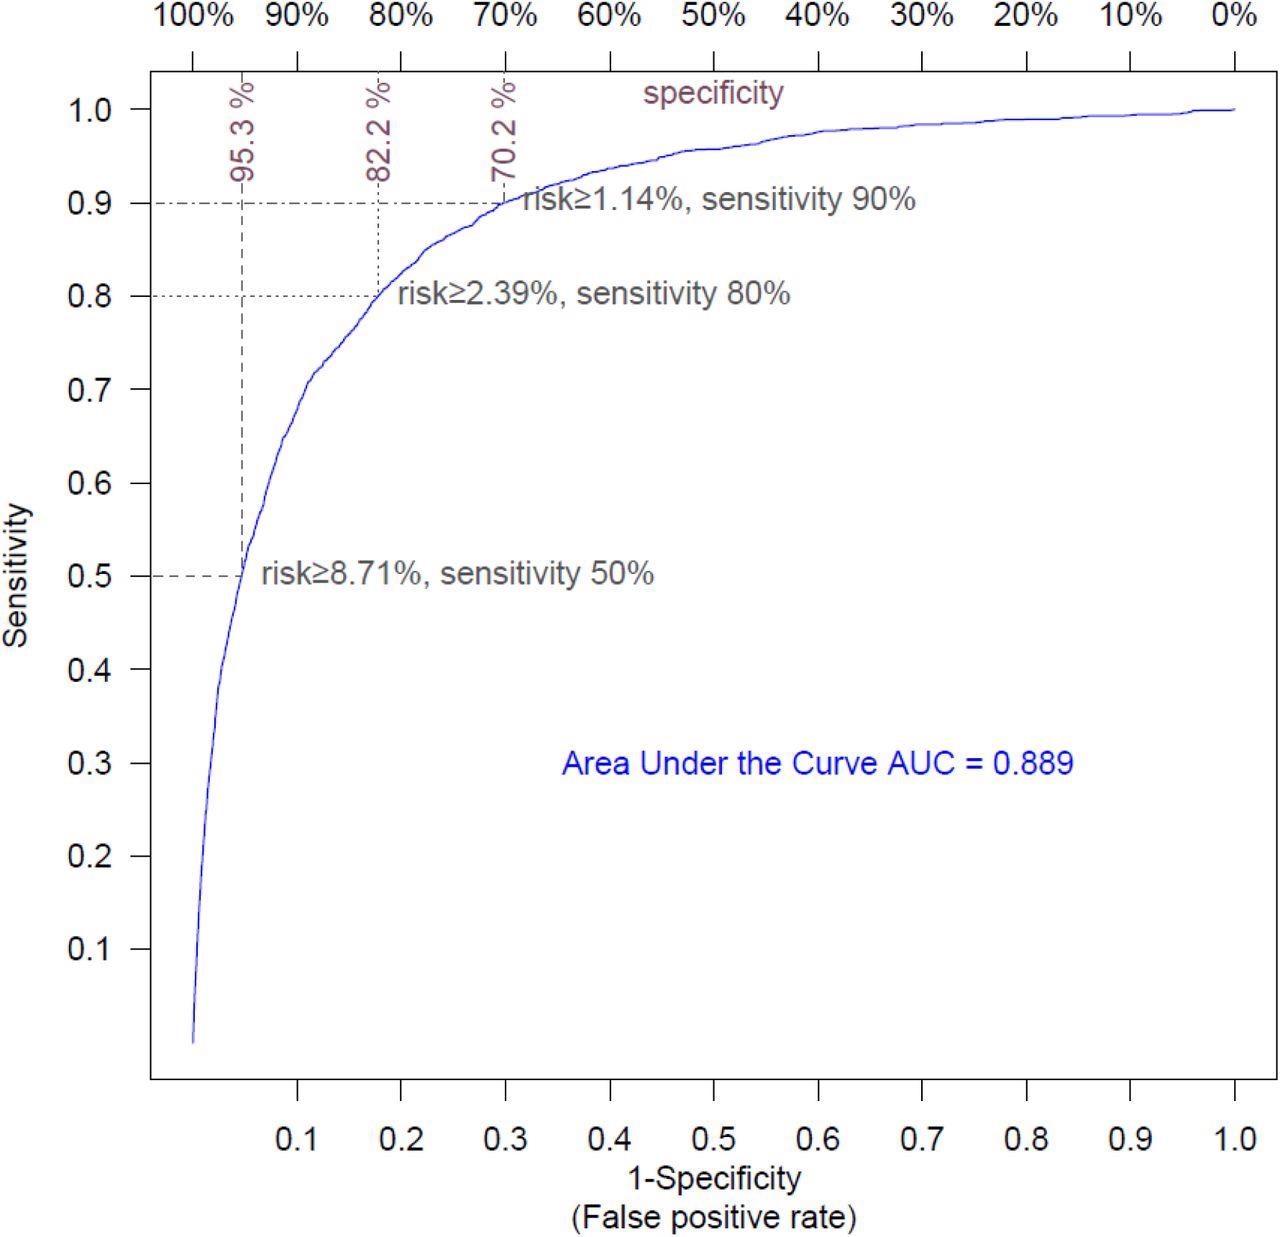 Receiver Operating Curve for hospitalization risk model The ROC curve shows the sensitivity and the specificity of the hospitalization model as its discrimination threshold is varied. With a threshold of 8.71% for risk, 50% of the COVID-19 episodes necessitating hospitalization can be identified (sensitivity=50%), and specificity is 95.3% (false positive